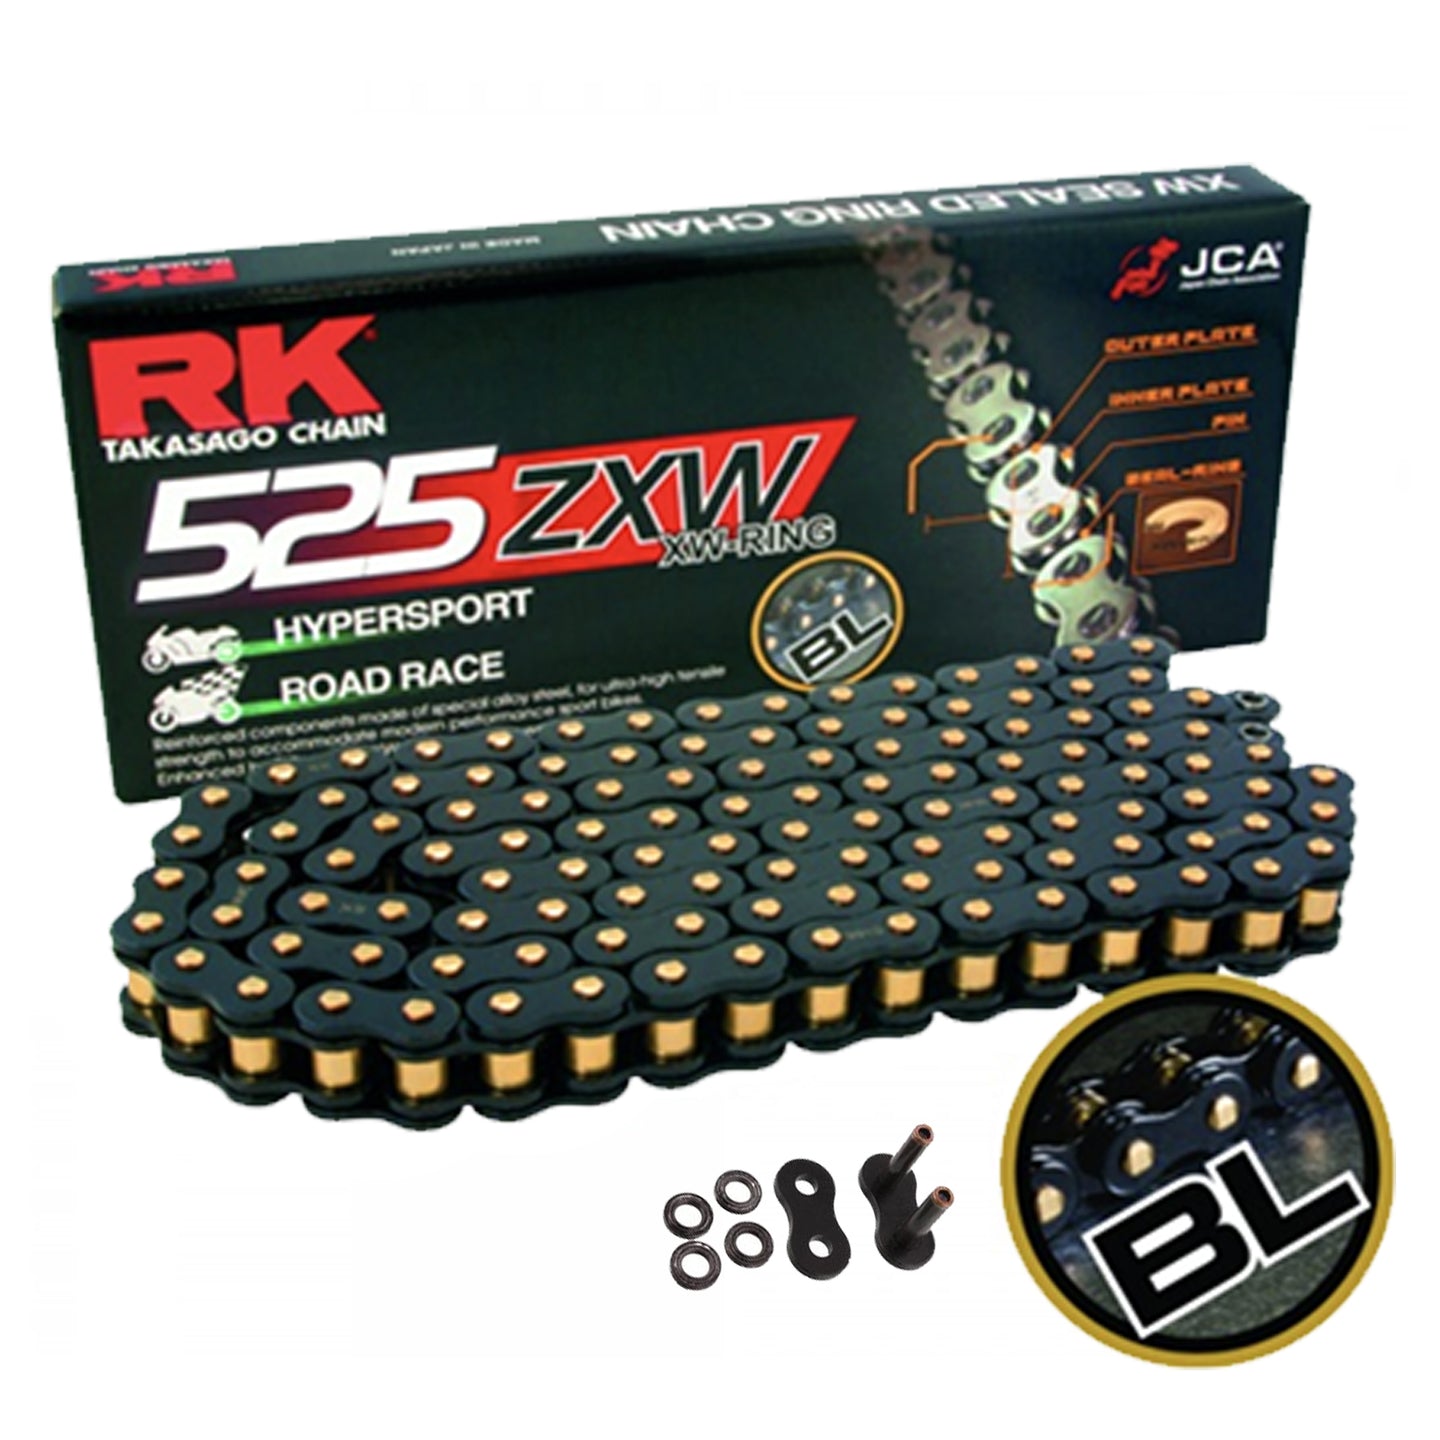 RK 525 ZXW Black Scale 120 Link X-Ring Super Heavy Duty Motorcycle Chain